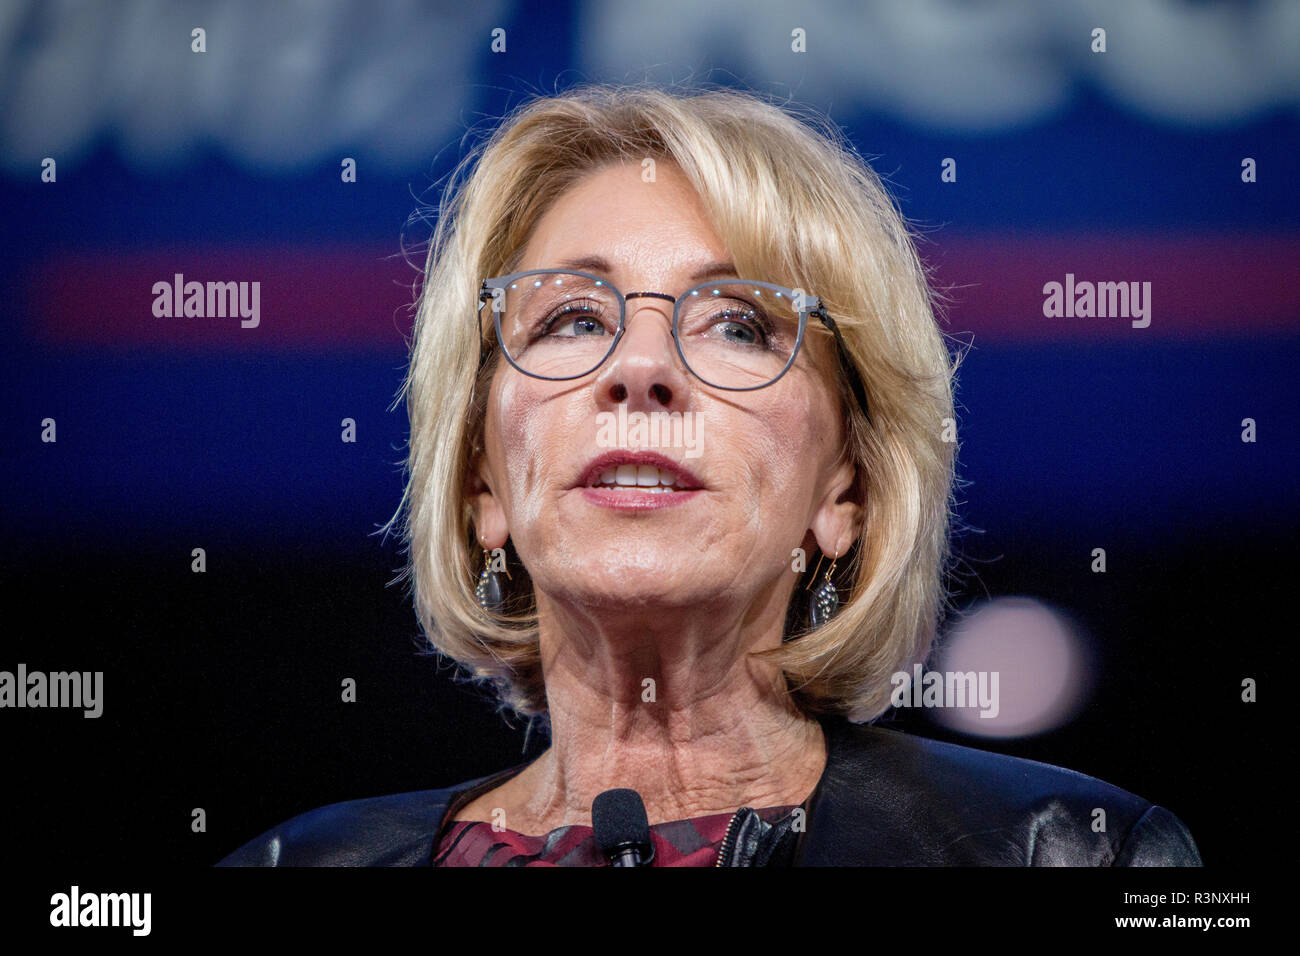 Businesswoman, philantropist and United States Secretary of Education Betsy DeVos talks at the CPAC, Conservative Political Action Conference. Stock Photo